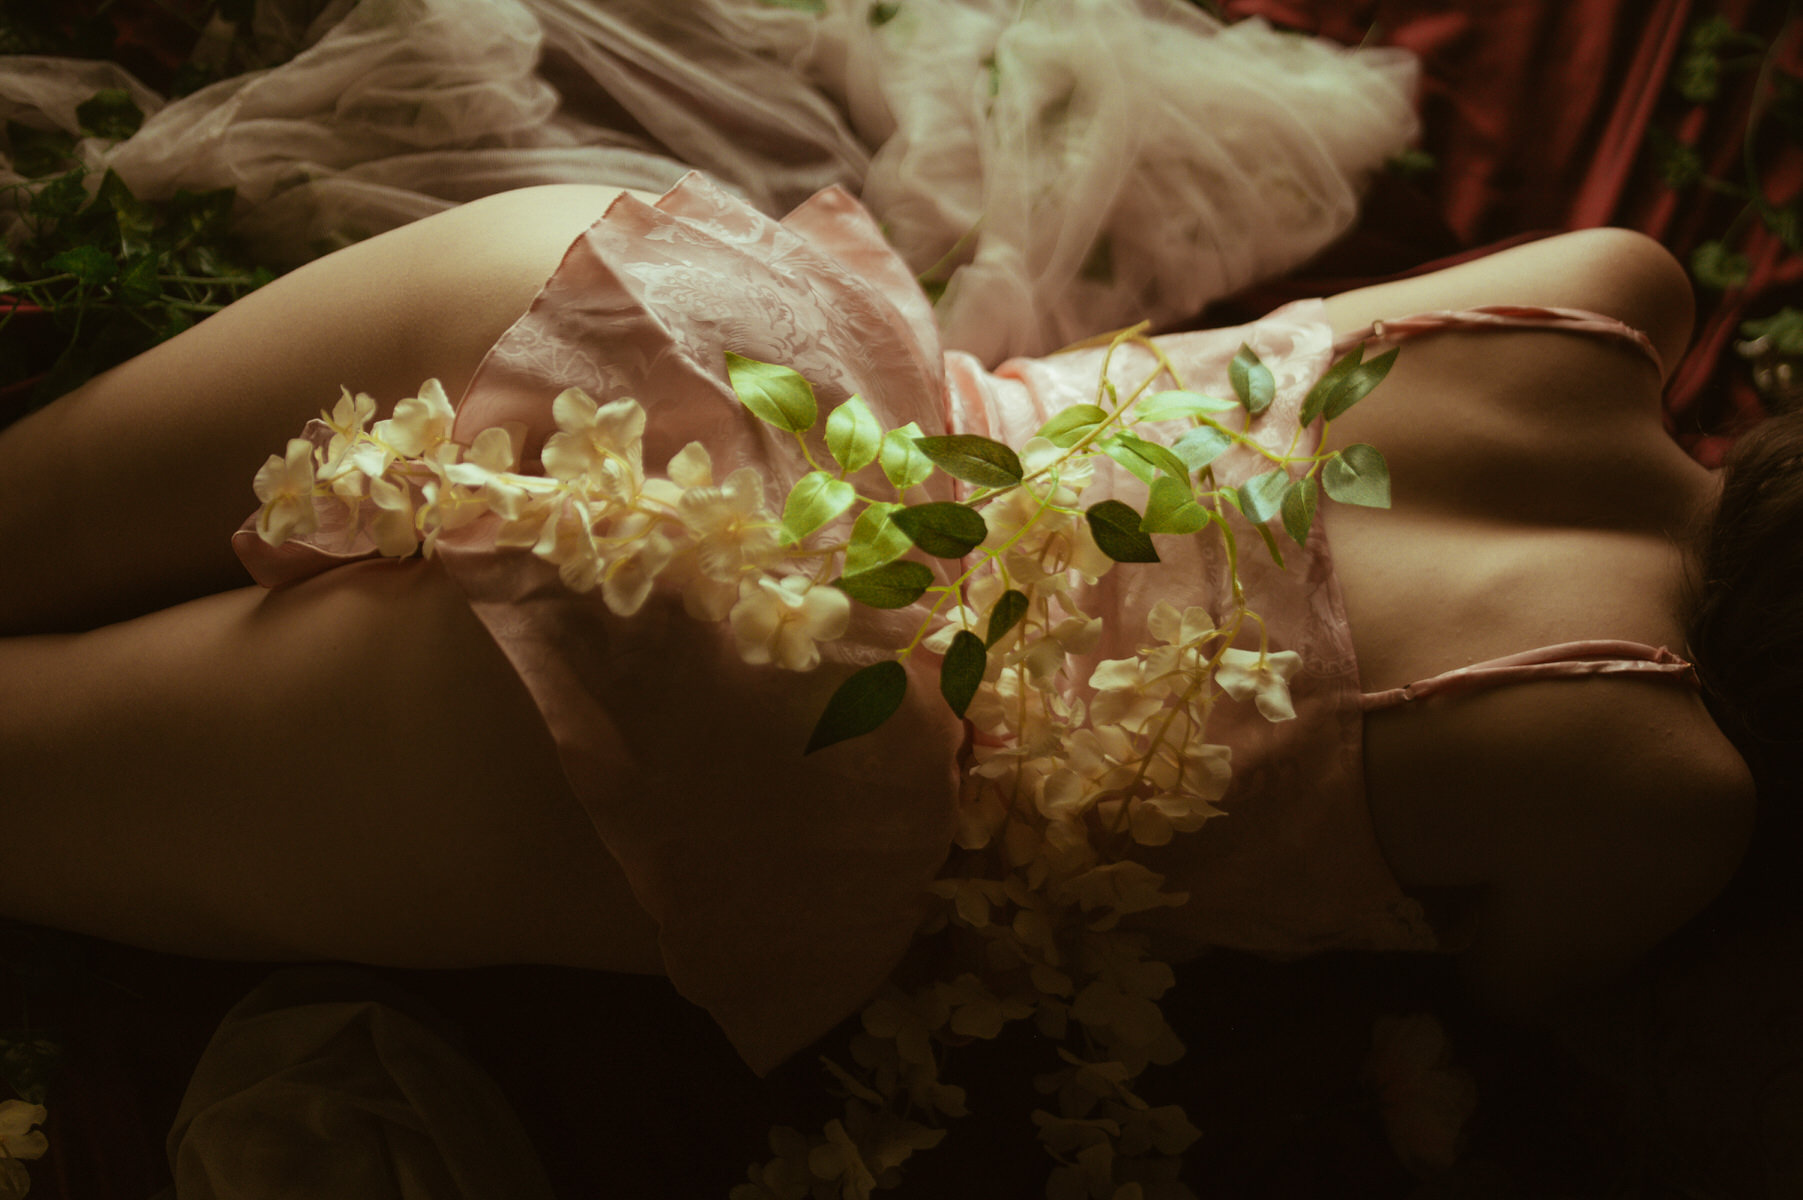 A woman posing on a bed adorned with flowers in Dallas Boudoir Photography.